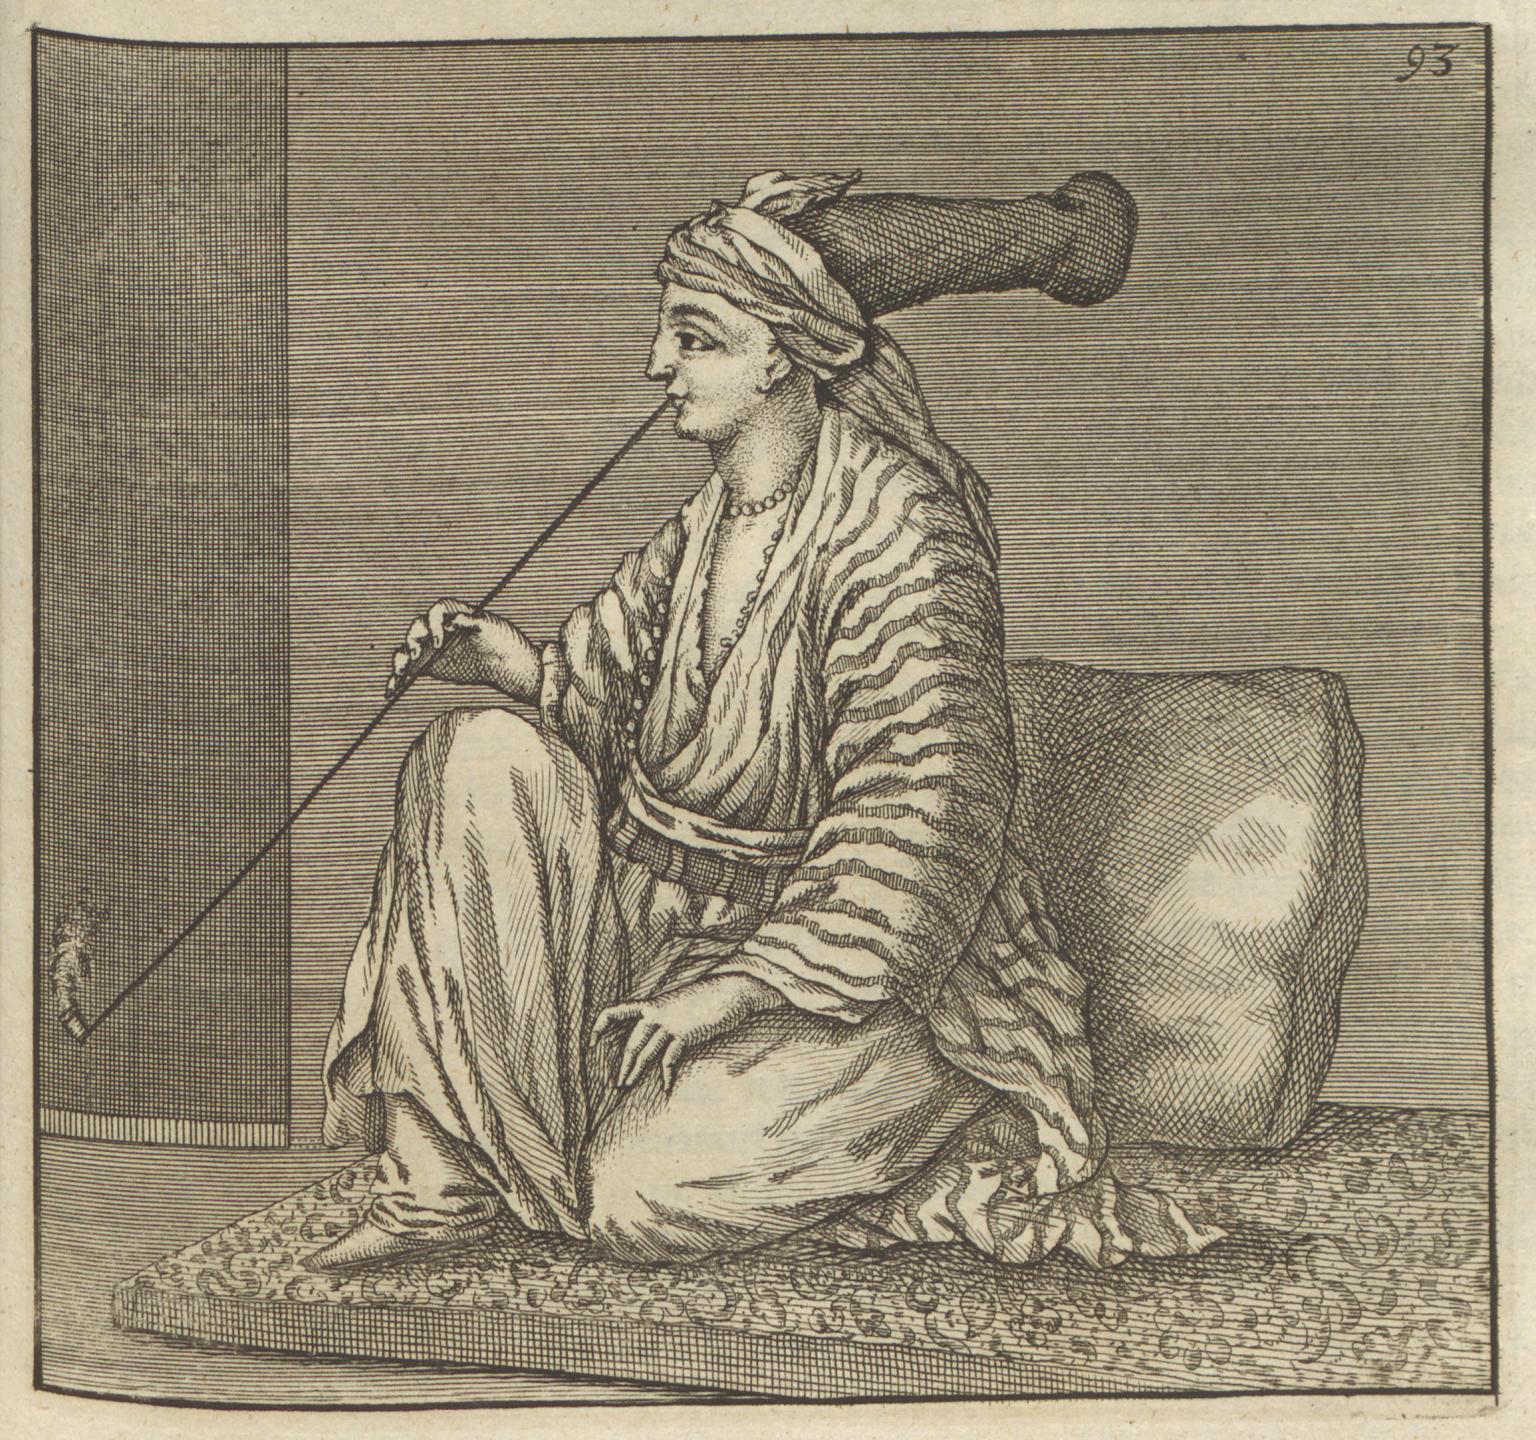 Print of seated person in large hat and robes facing to the left smoking a very long pipe. 